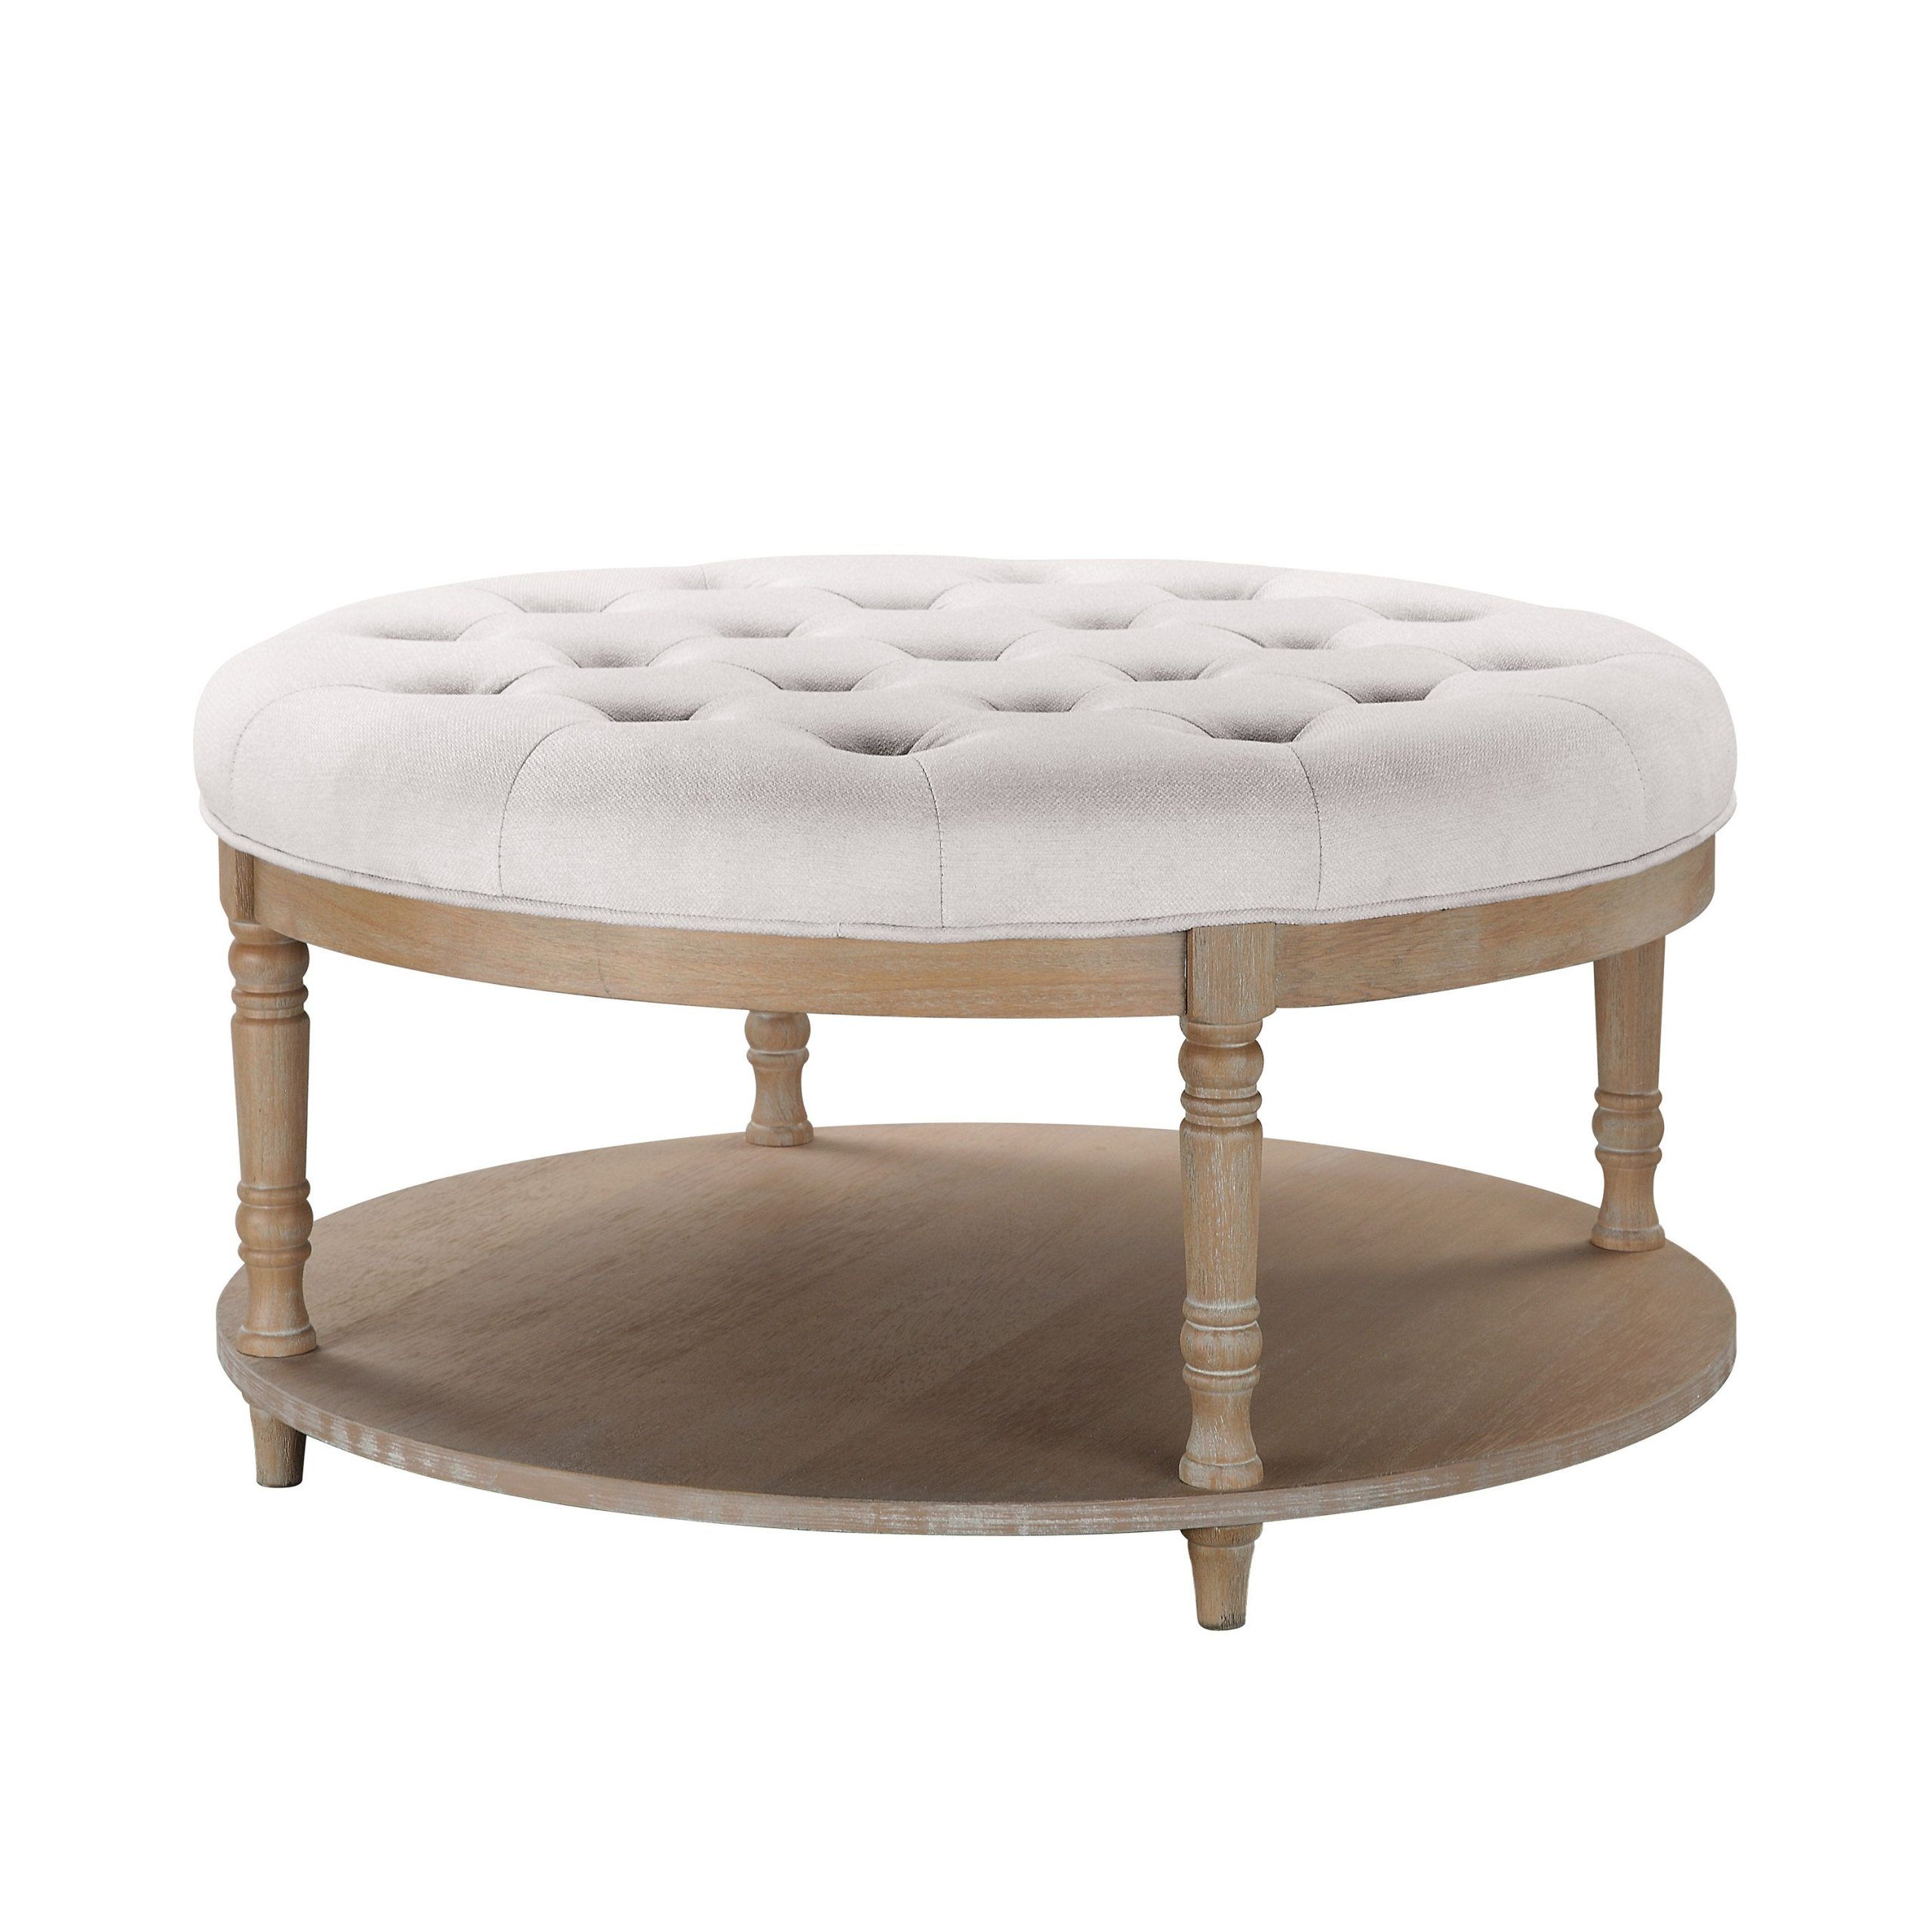 Corvus Savannah 36 Inch Round Storage Tufted Chesterfield Cocktail Ottoman  – Overstock – 33992910 Within 2019 36 Inch Round Ottomans (View 5 of 15)